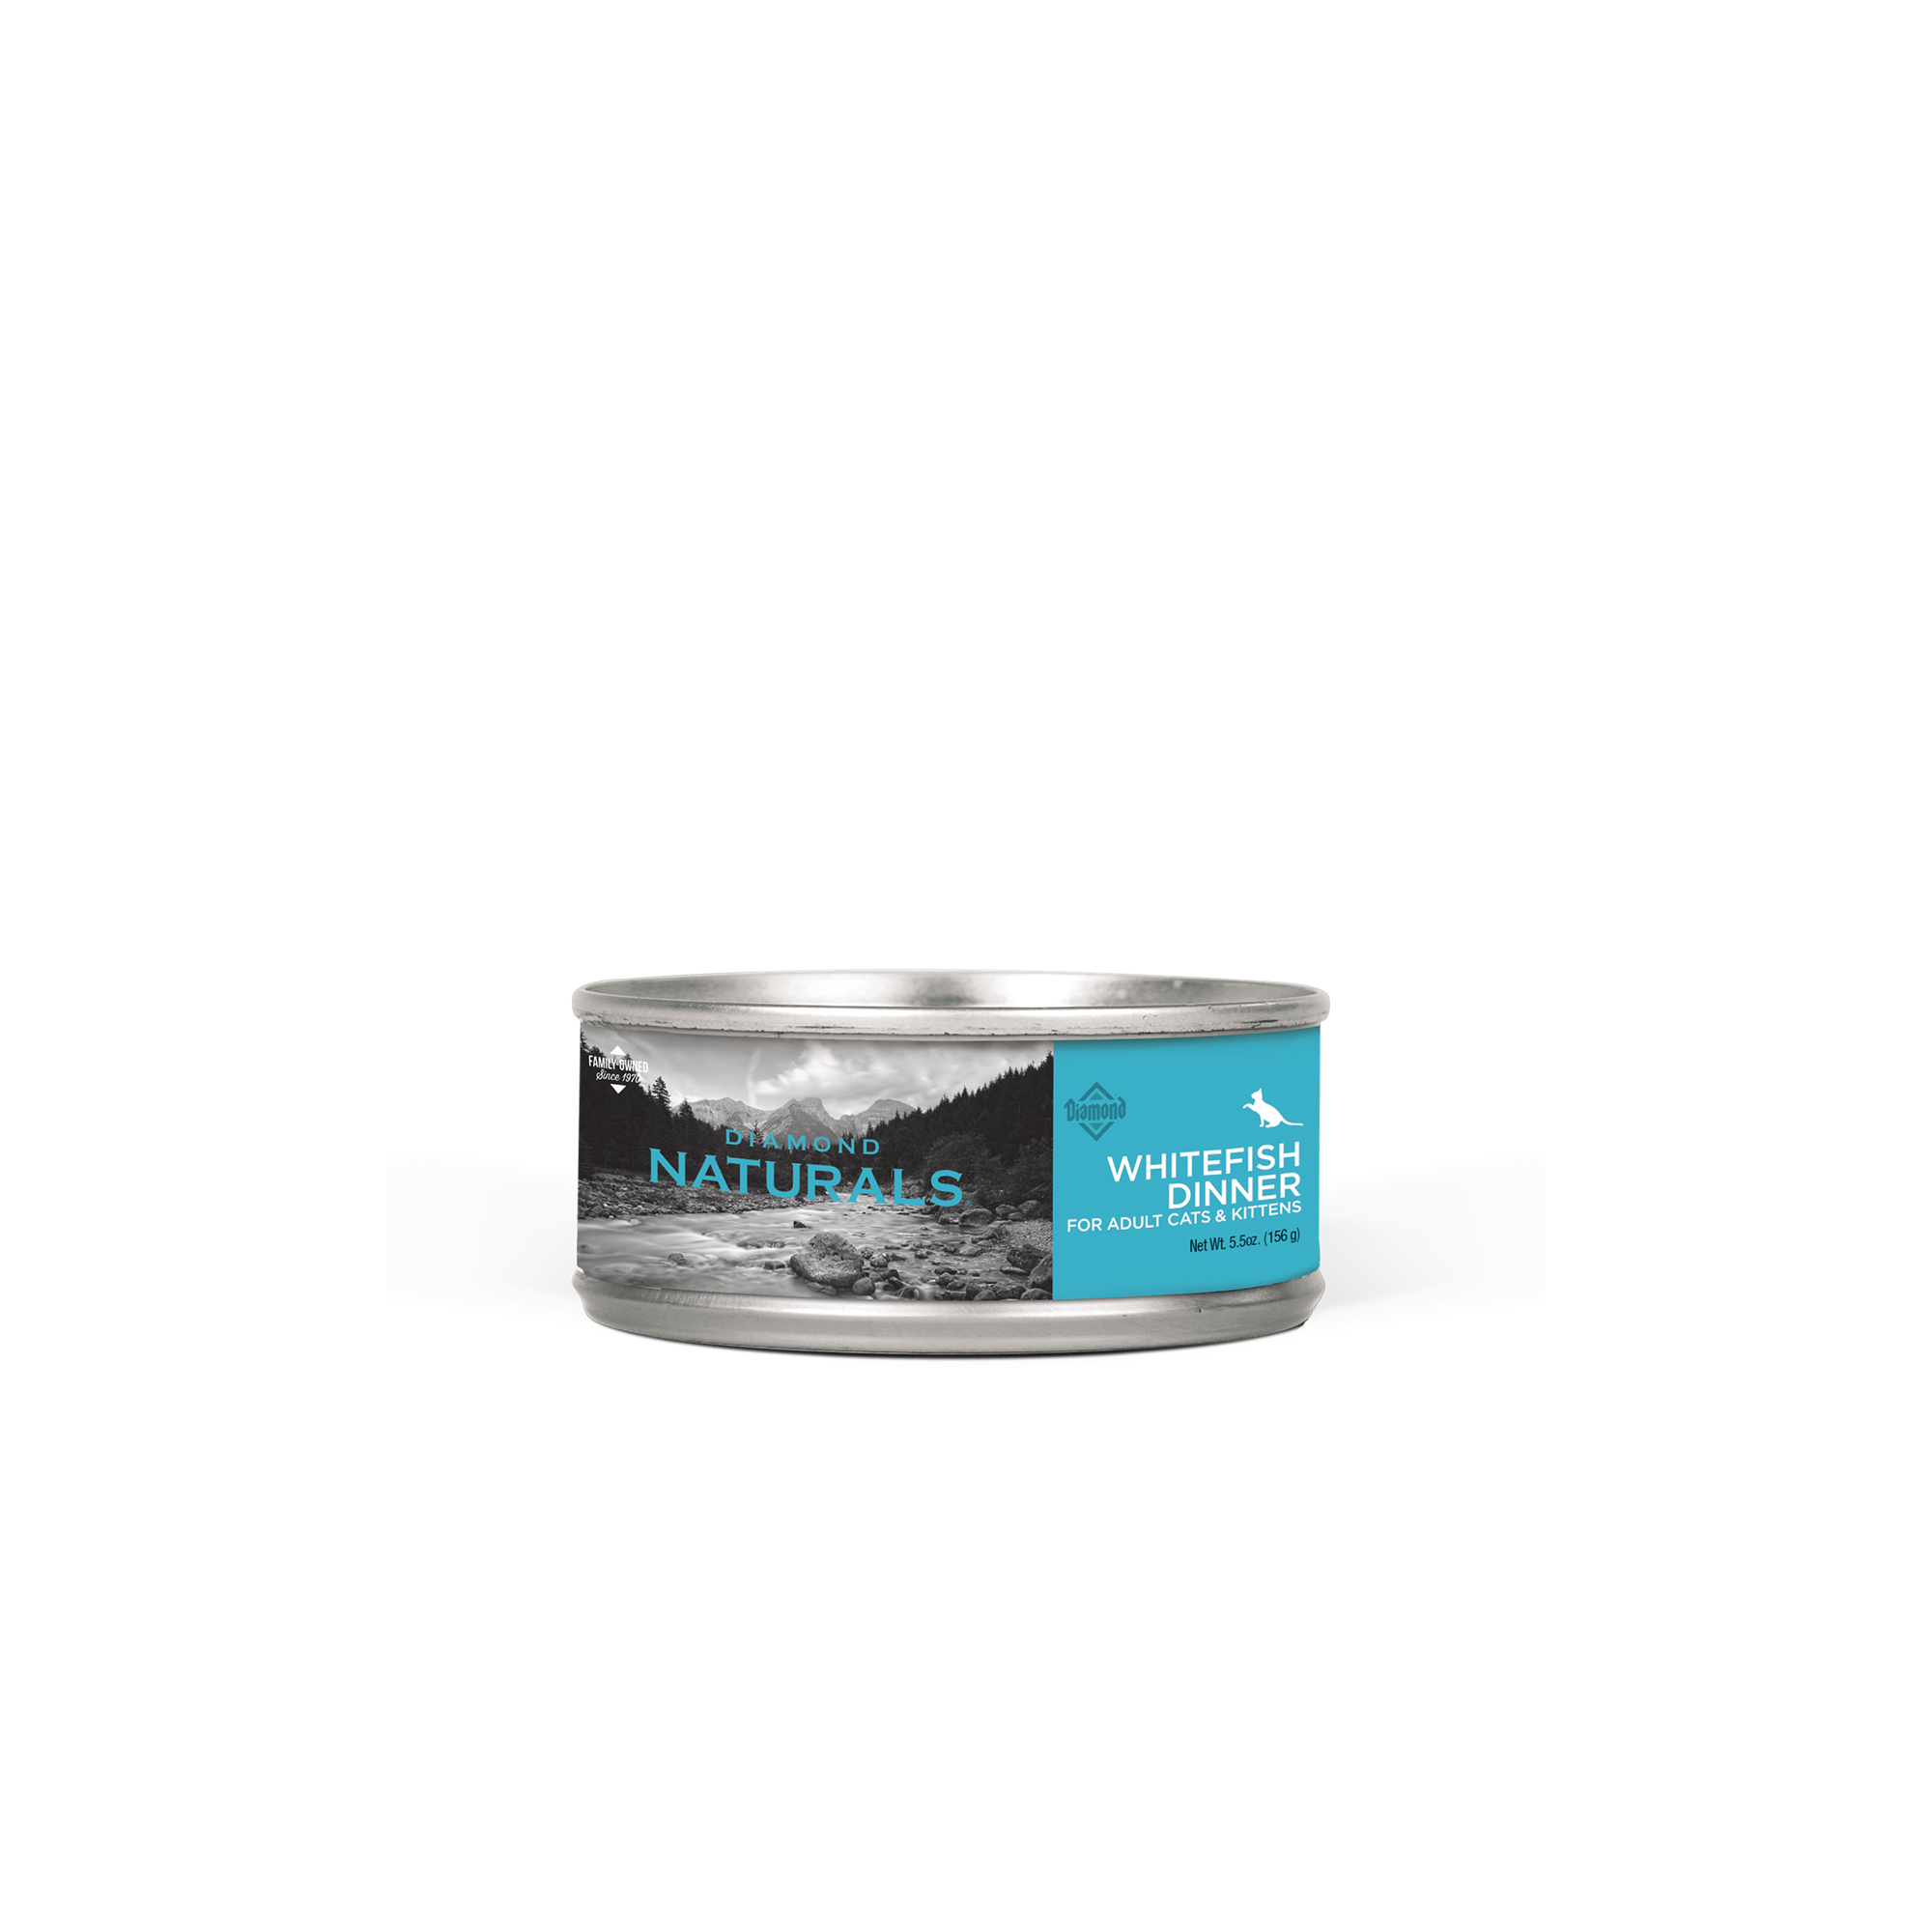 Diamond Naturals Whitefish Canned Dinner for Adult Cats & Kittens product packaging